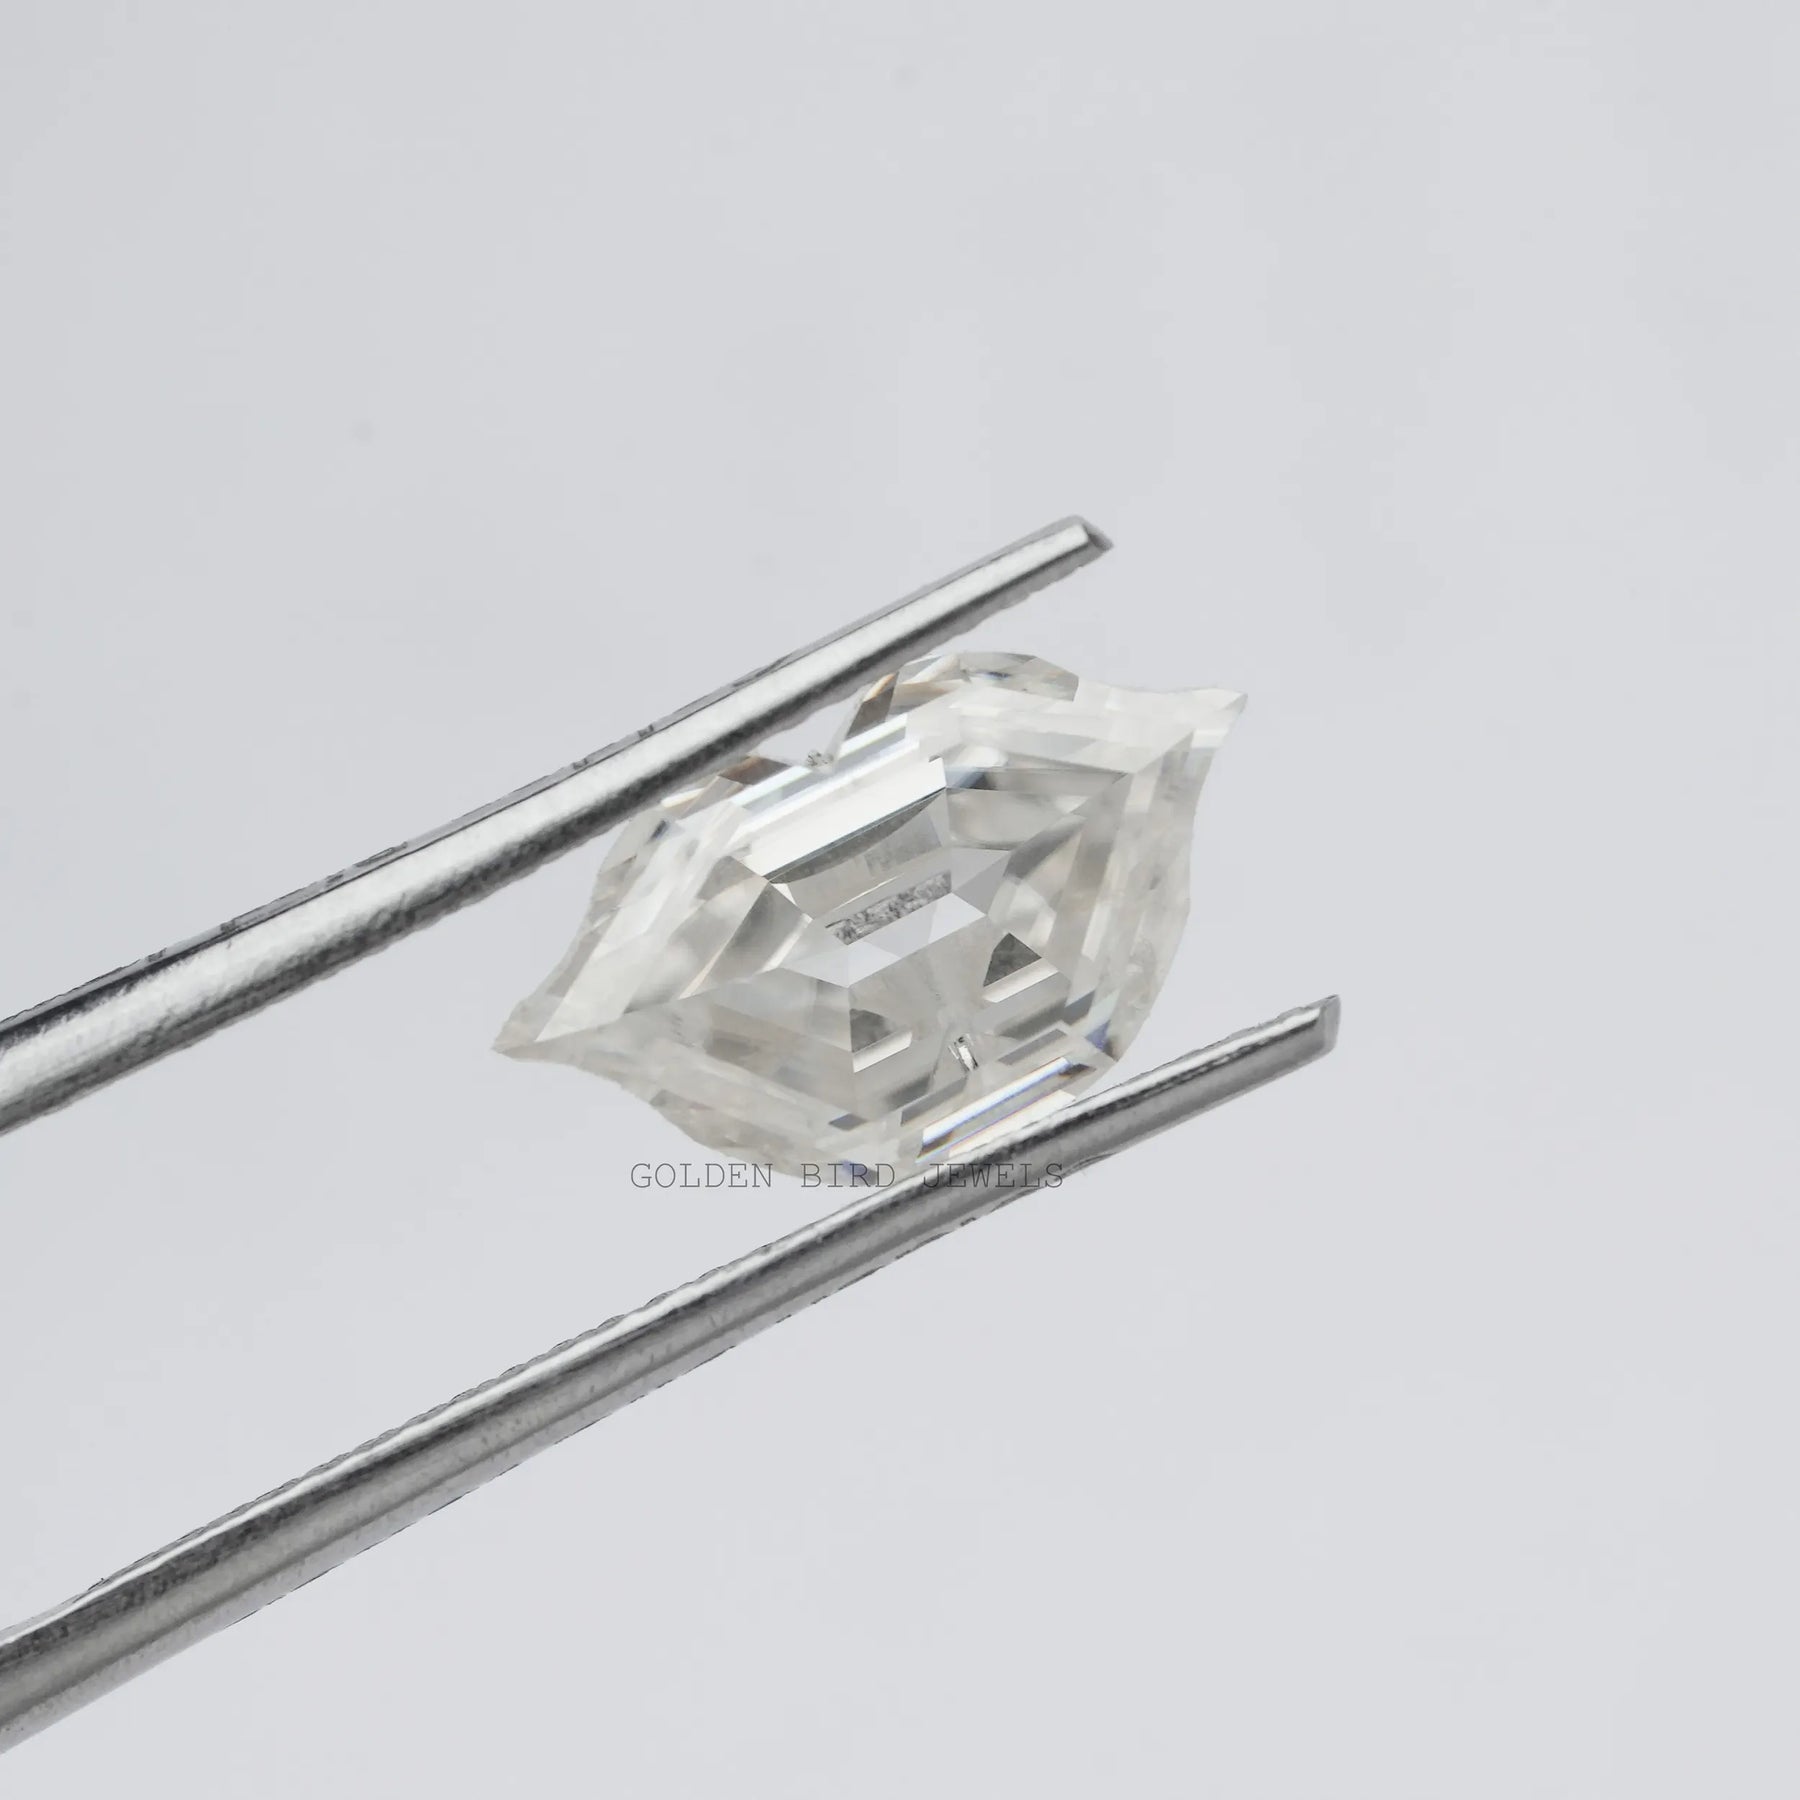 close-up image of a 2.33 carat lips cut Moissanite stone